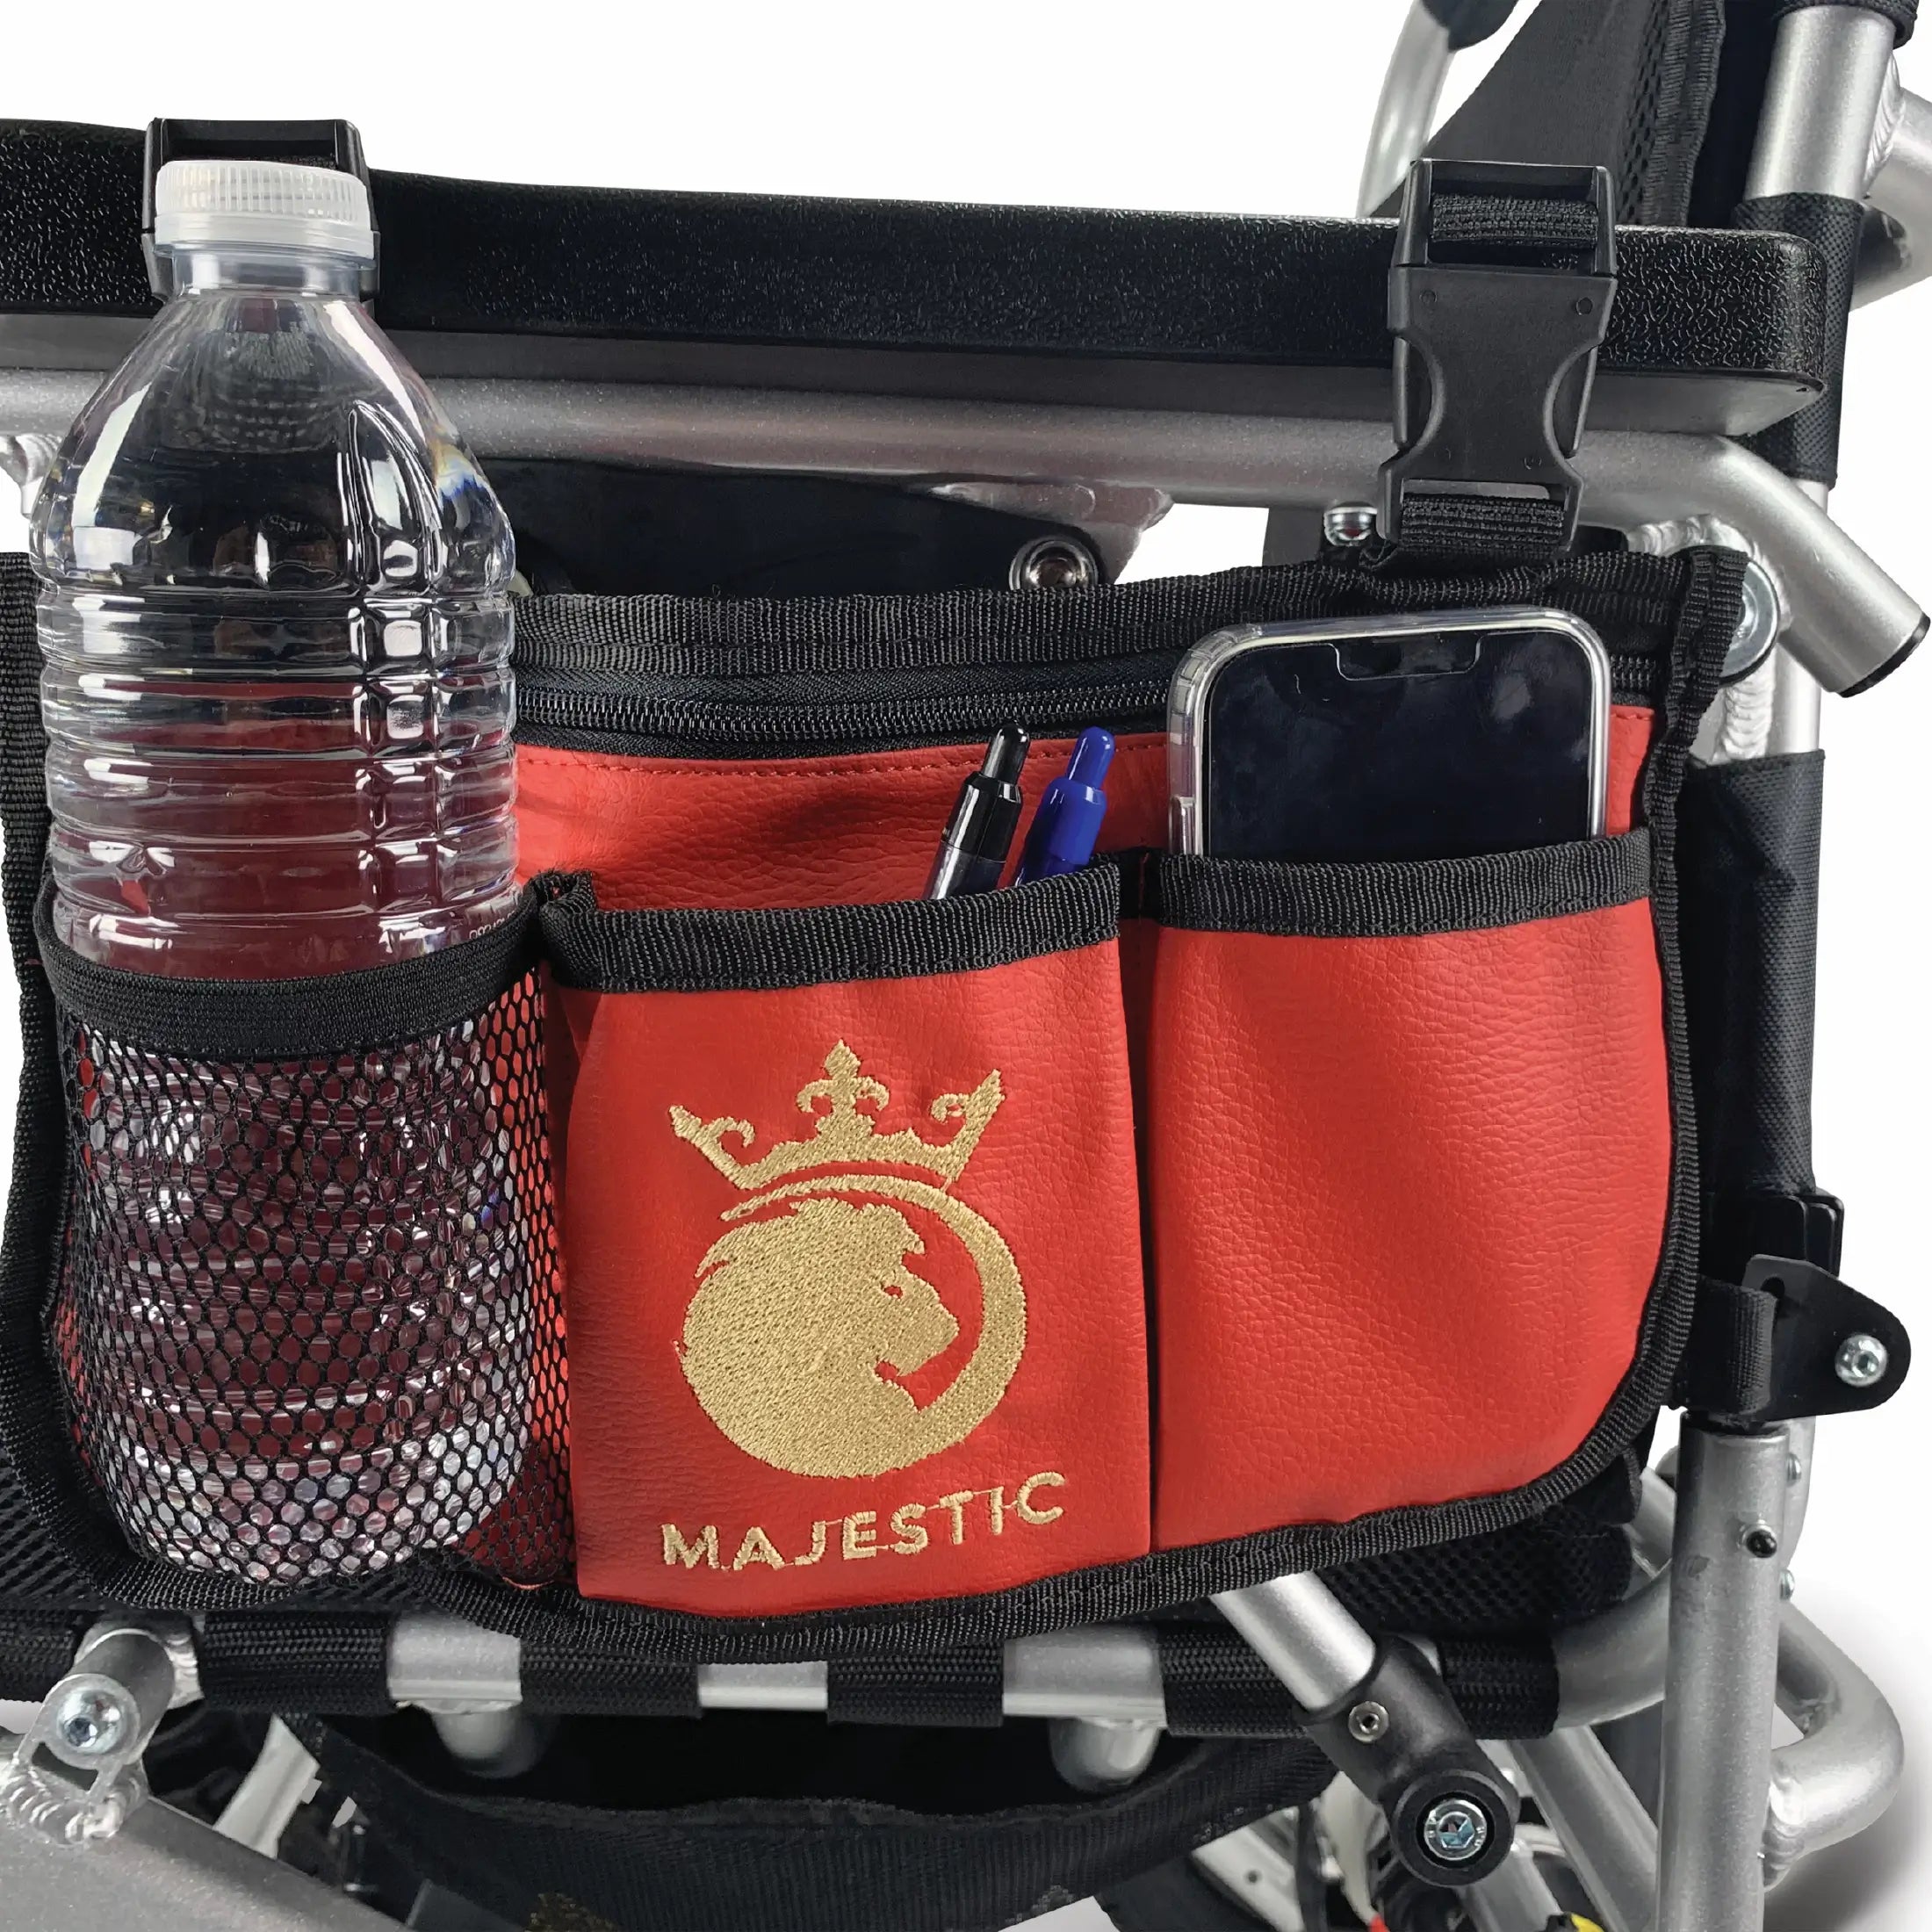 Majestic Multipurpose Wheelchair & Scooter Bag